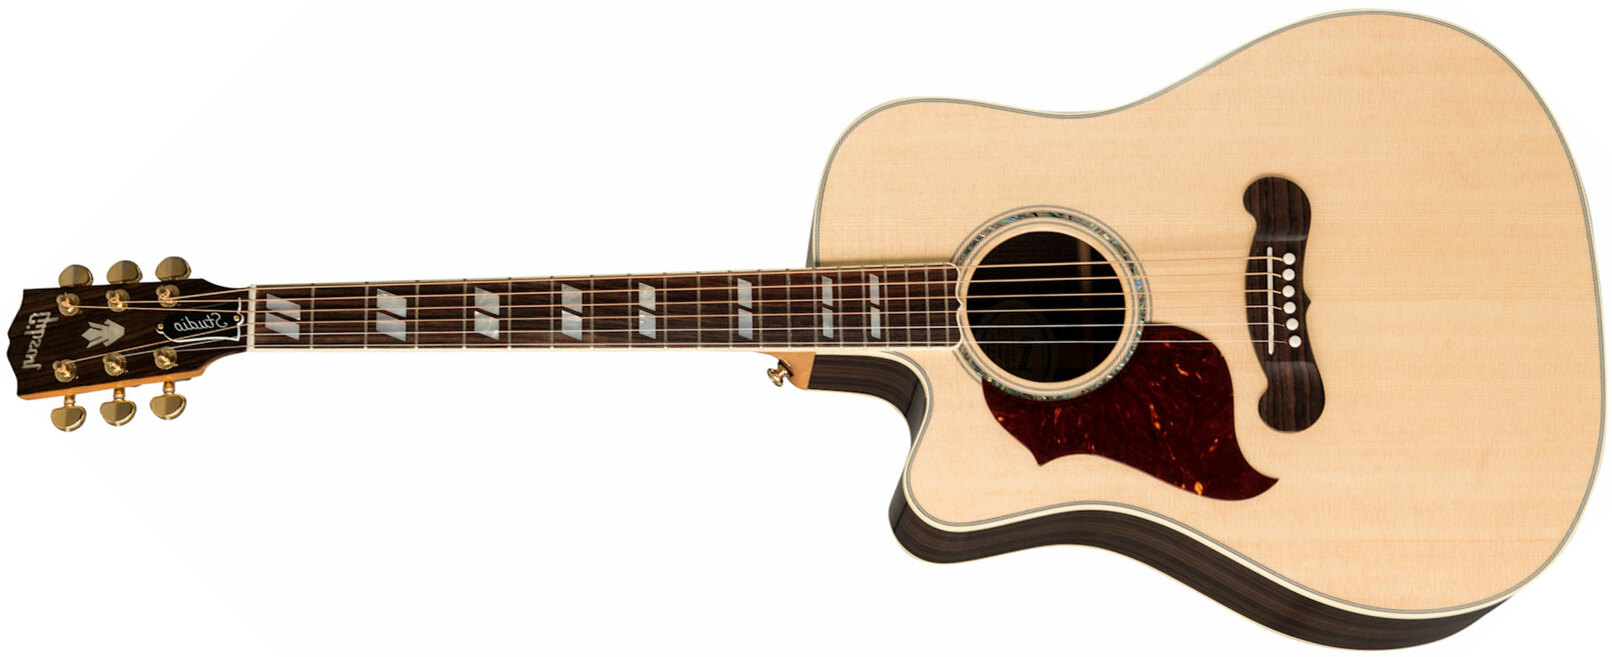 Gibson Songwriter Cutaway Lh Gaucher 2019 Dreadnought Epicea Palissandre Rw - Natural - Acoustic guitar & electro - Main picture